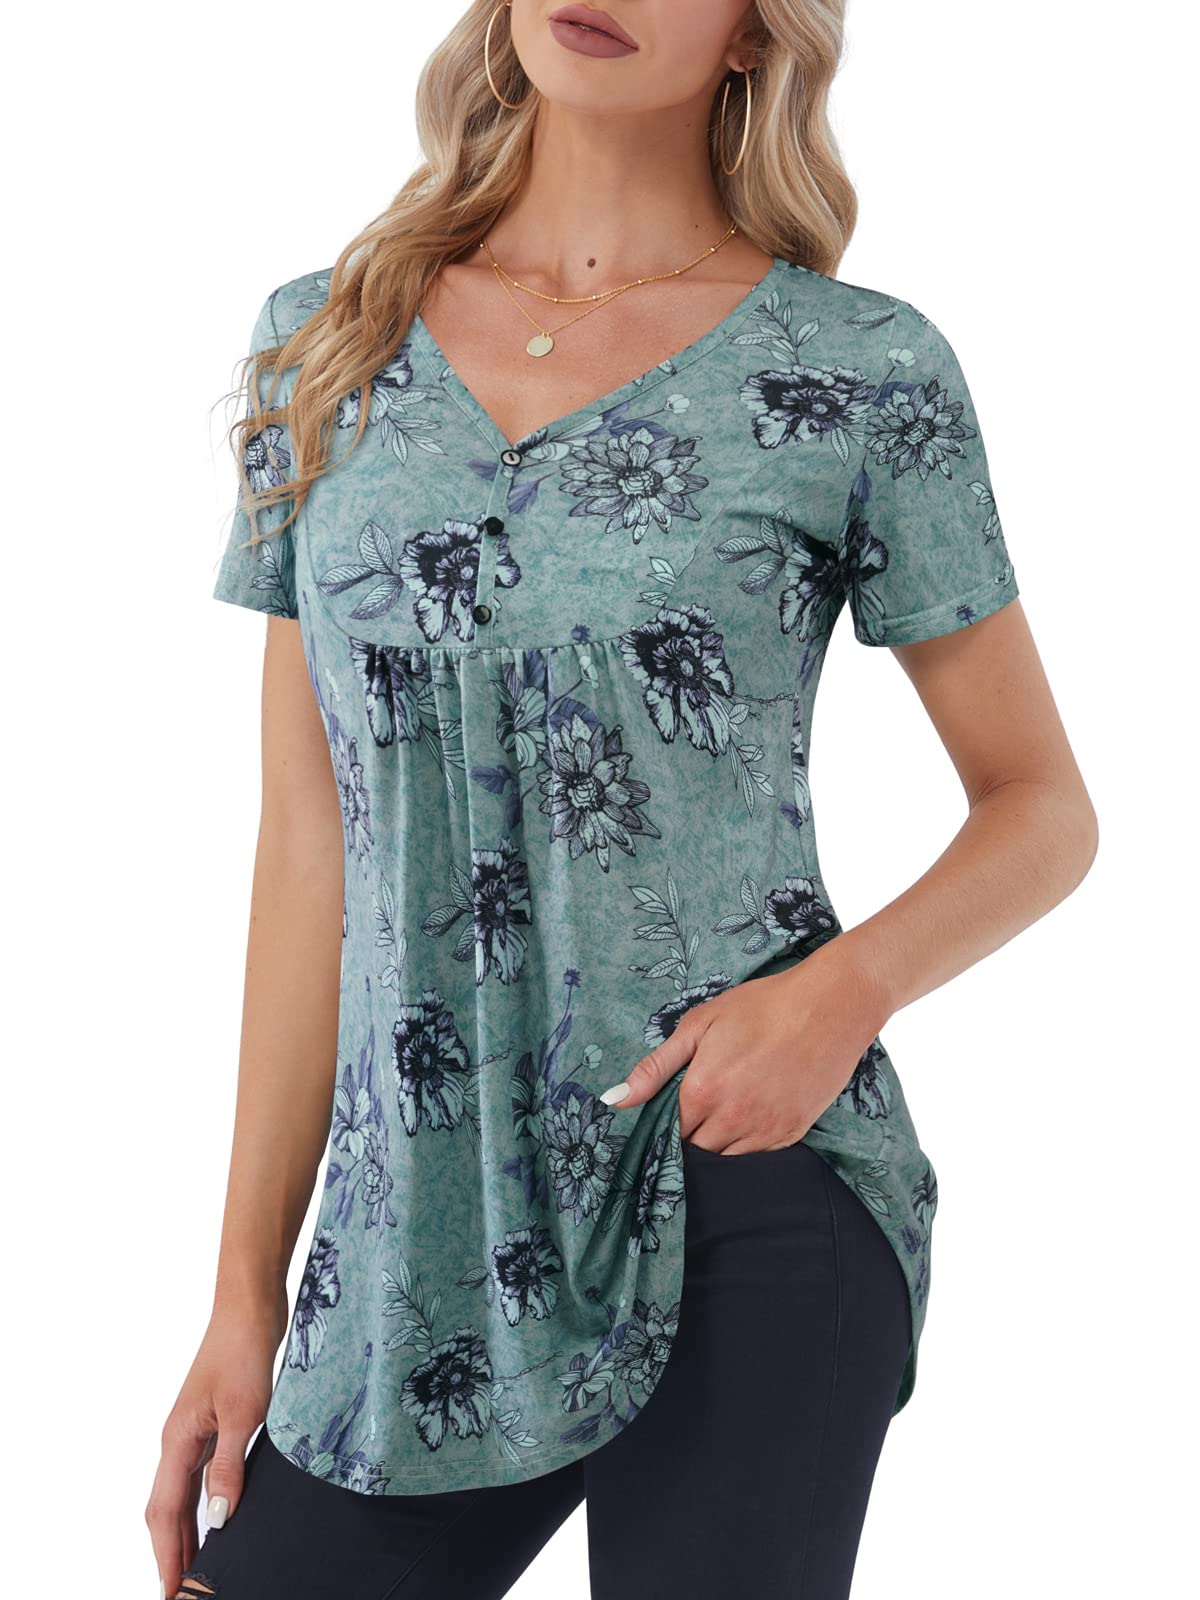 BAISHENGGT Women's Blue Floral Flowy Tunic Tops for Leggings Henley V Neck Short Sleeve Shirts Casual Ruched Blouses